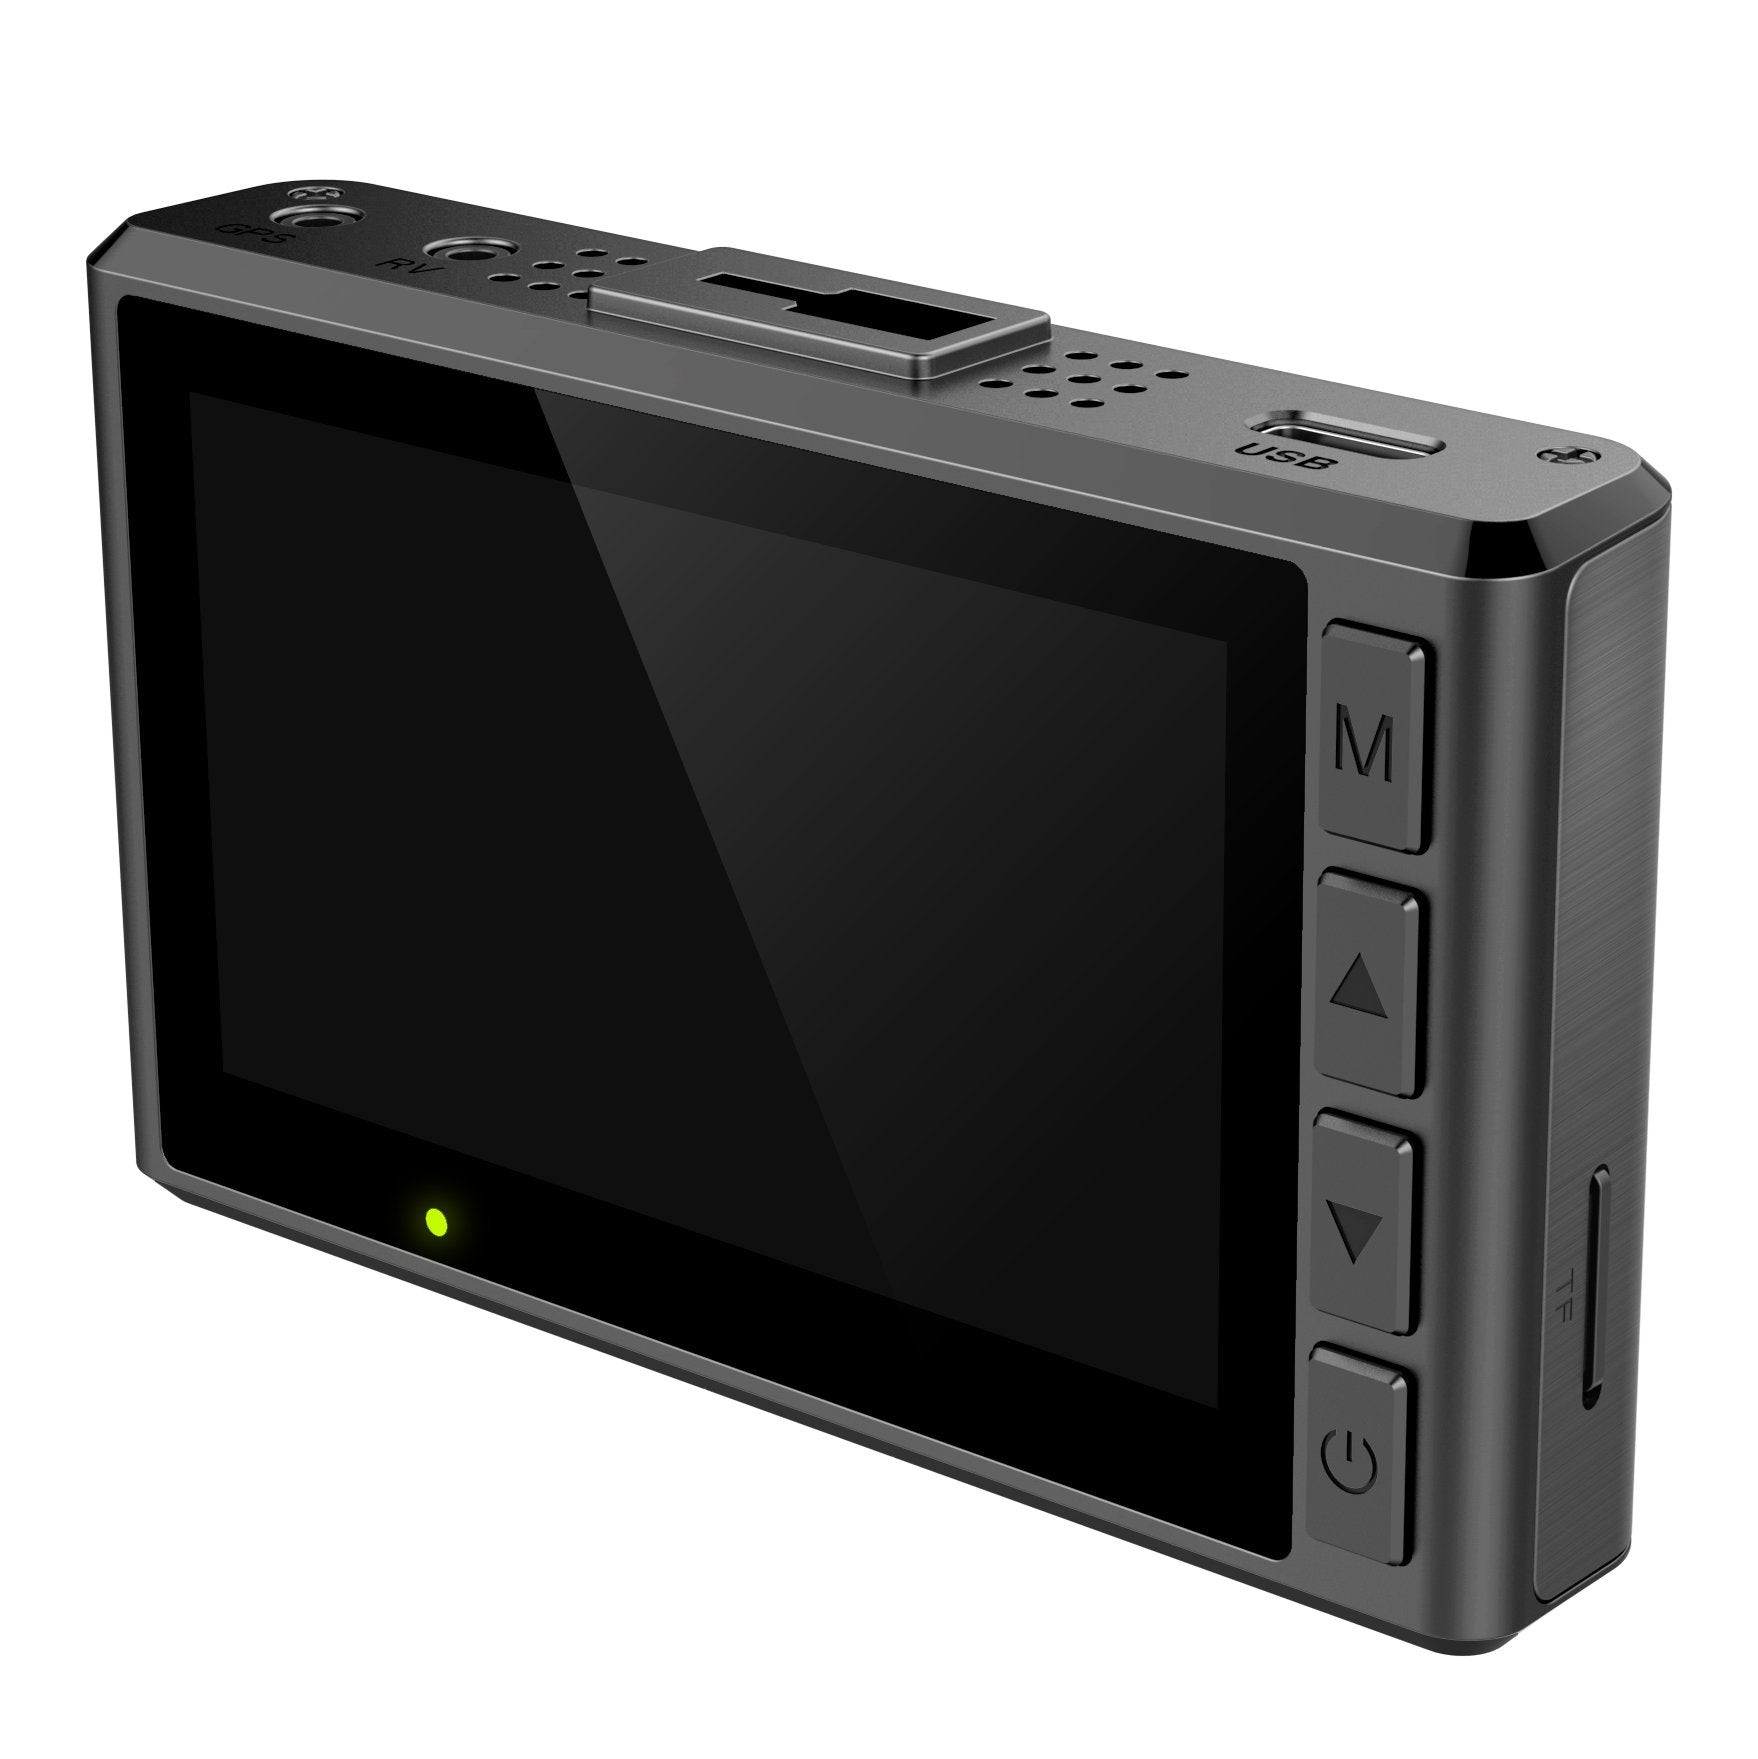 Agri-Farming 2K Pinnacle Touch-Screen Dash Cam w/ WIFI! Record in up to 2K Video Resolution!